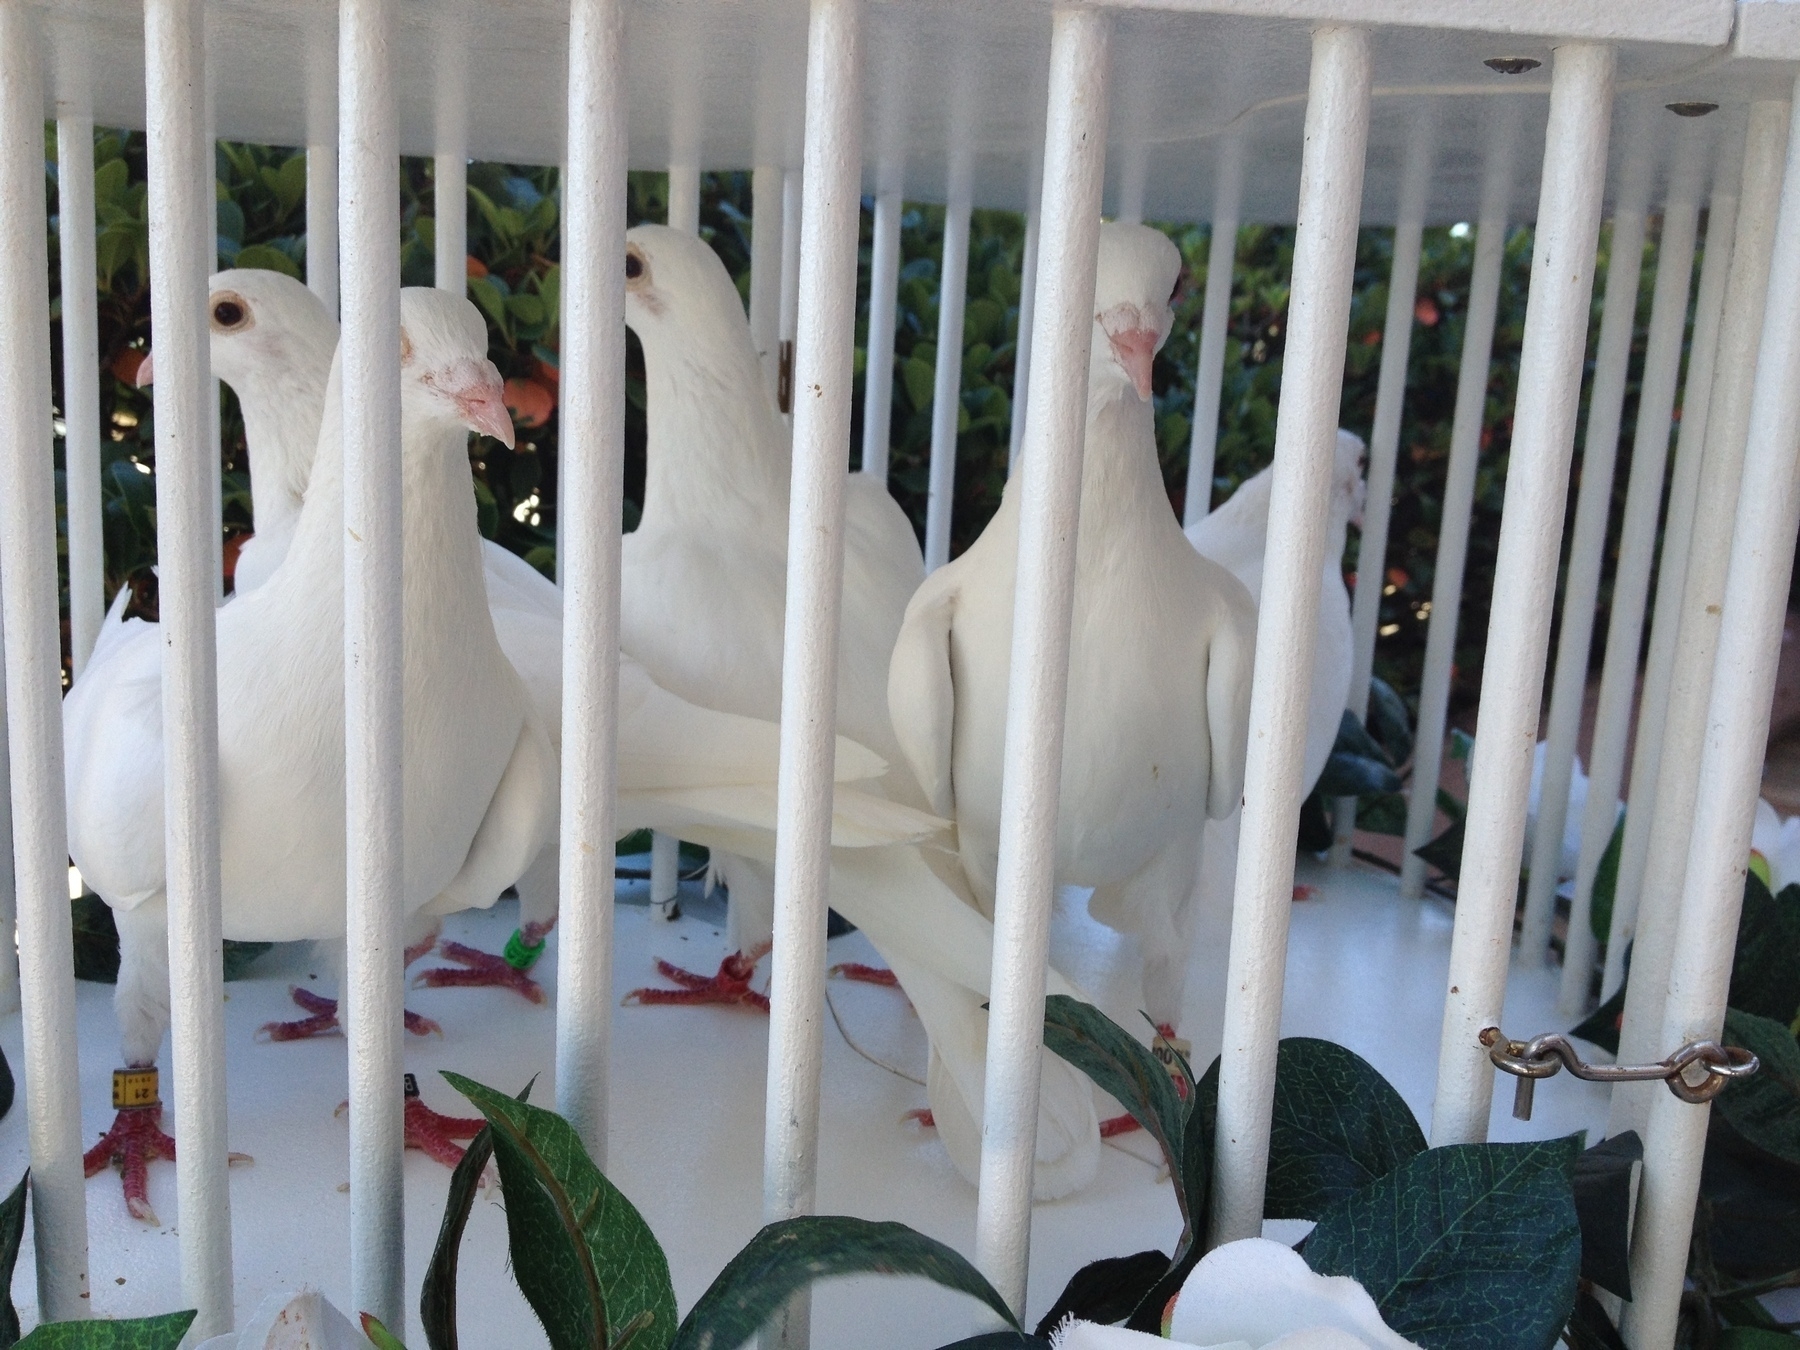 Five snow white doves in a white cage, the bars made of painted dowel. The birds are healthy, alert and interested in their surroundings, as they wait to be released into the air as part of a wedding ceremony taking place on Long Reef Beach, Sydney. They have pink feet and coloured identification bands on their legs.